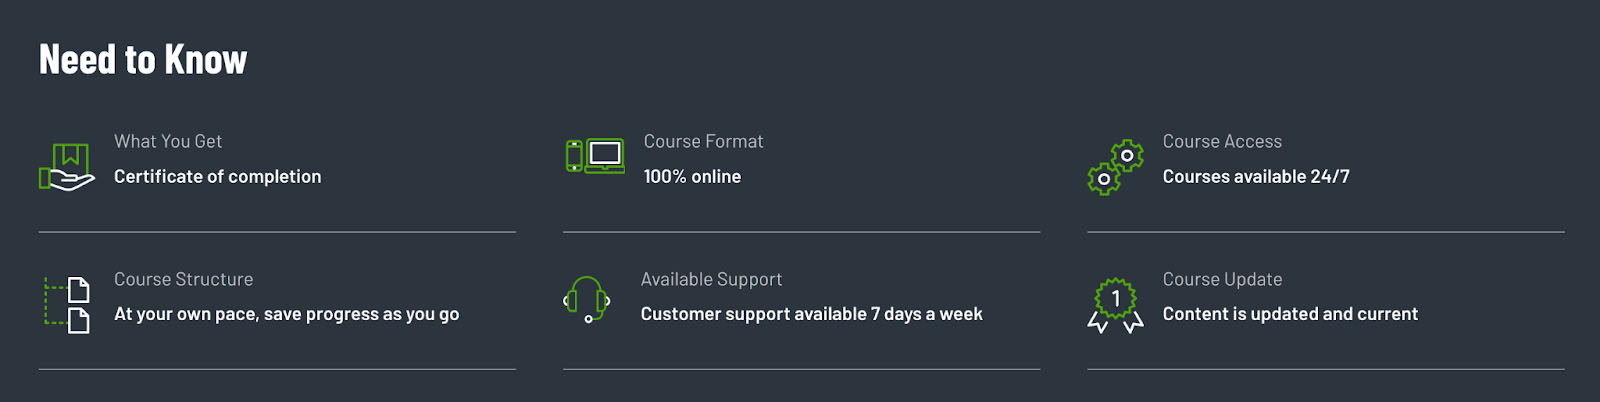 Screenshot with icons and description of whats included with course packages.